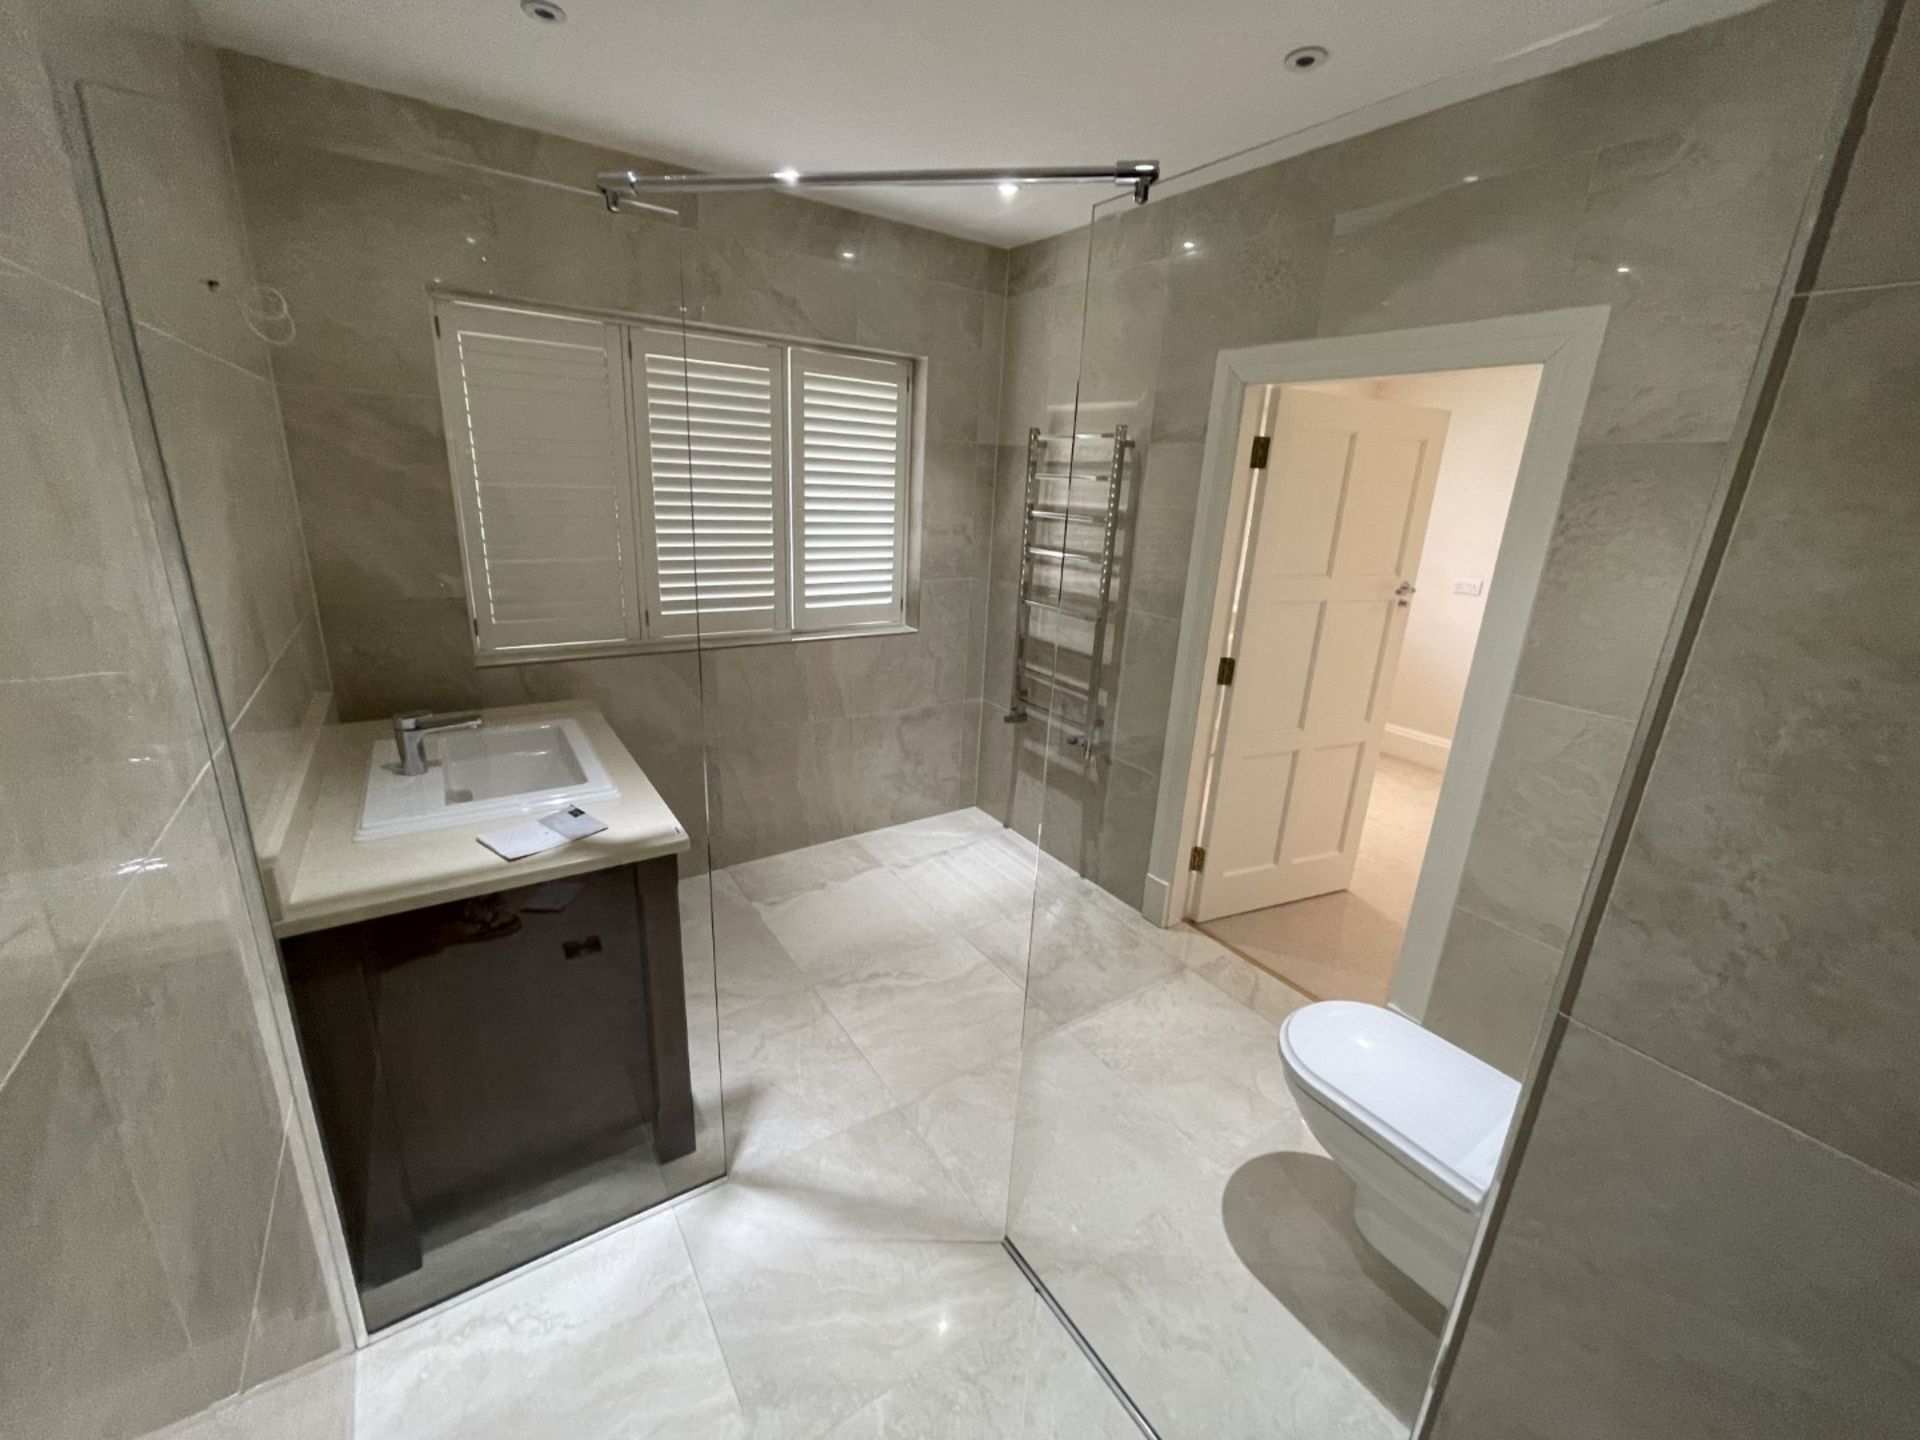 1 x Premium Shower and Enclosure + hansgrohe Controls and Thermostat - Ref: PAN251 / Bed2bth - CL896 - Image 12 of 15